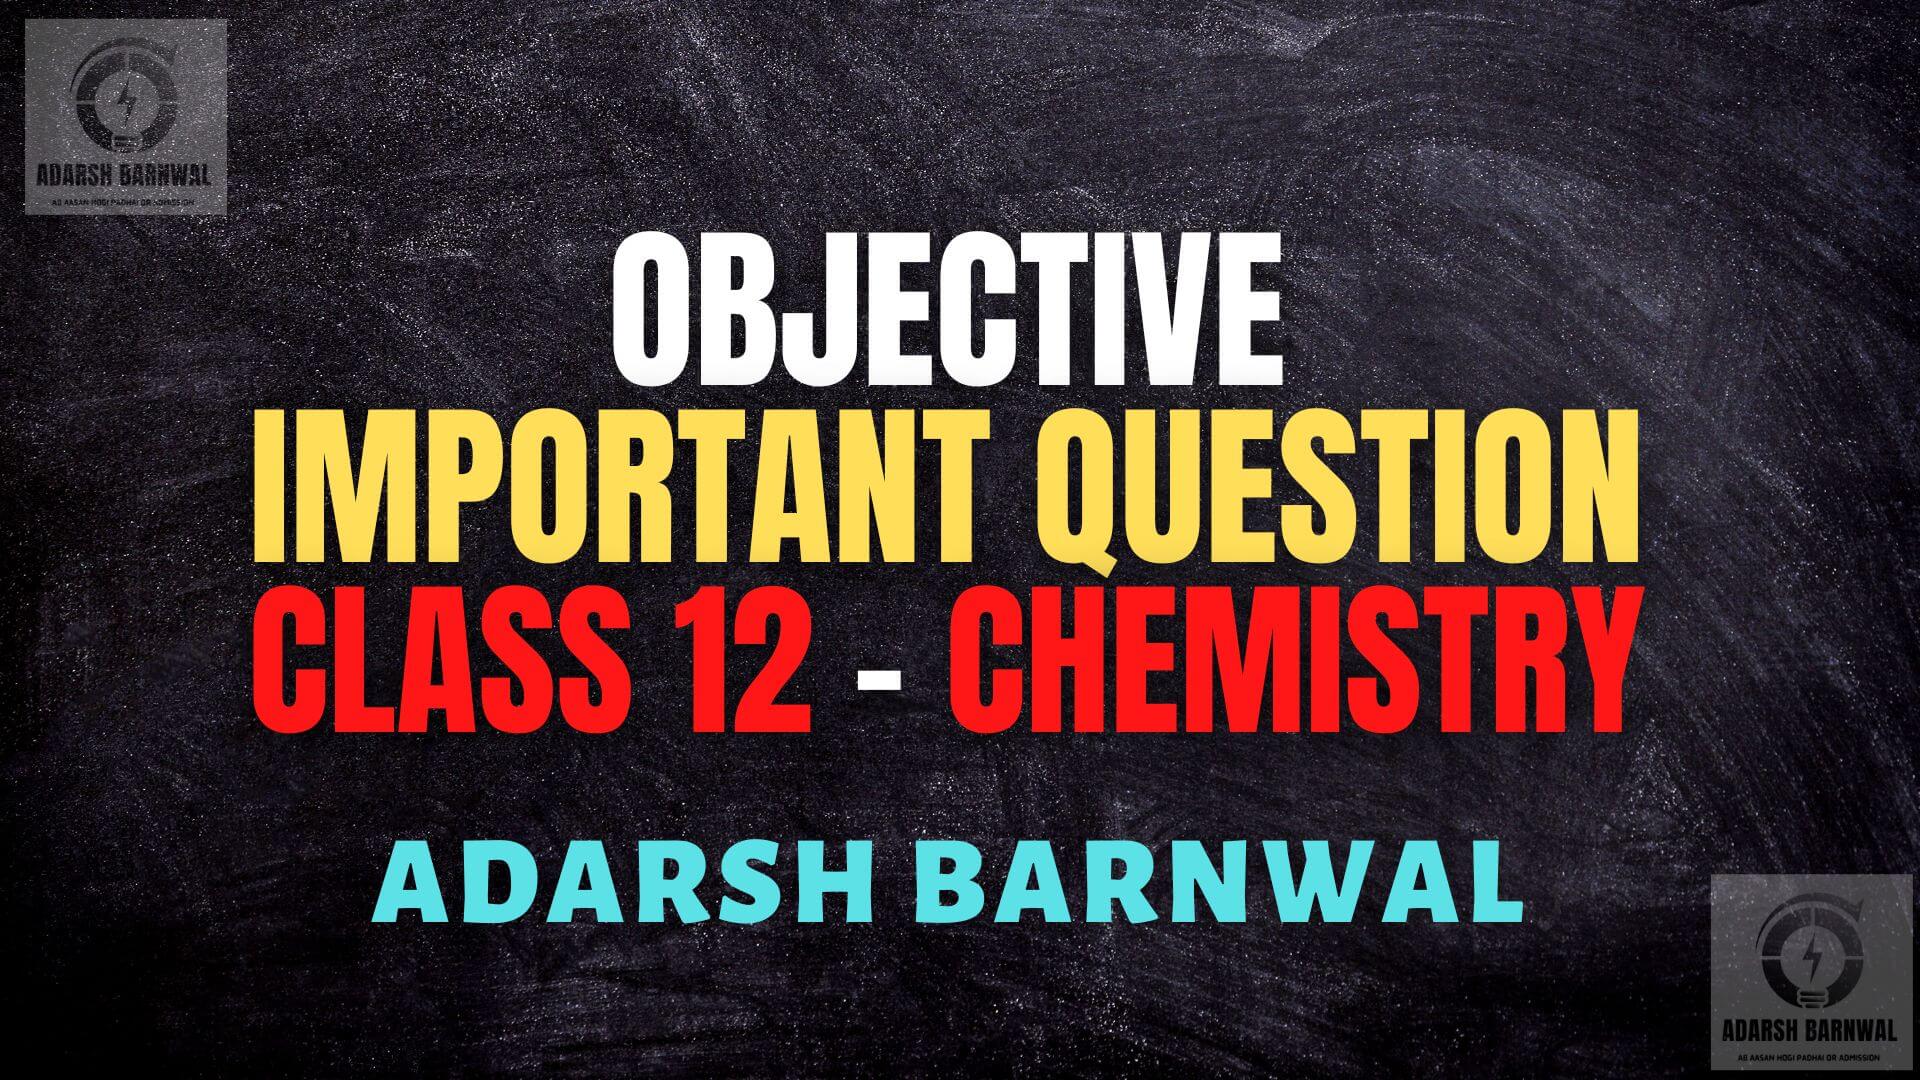 Class 12 chemistry Important objective Question By Adarsh Barnwal